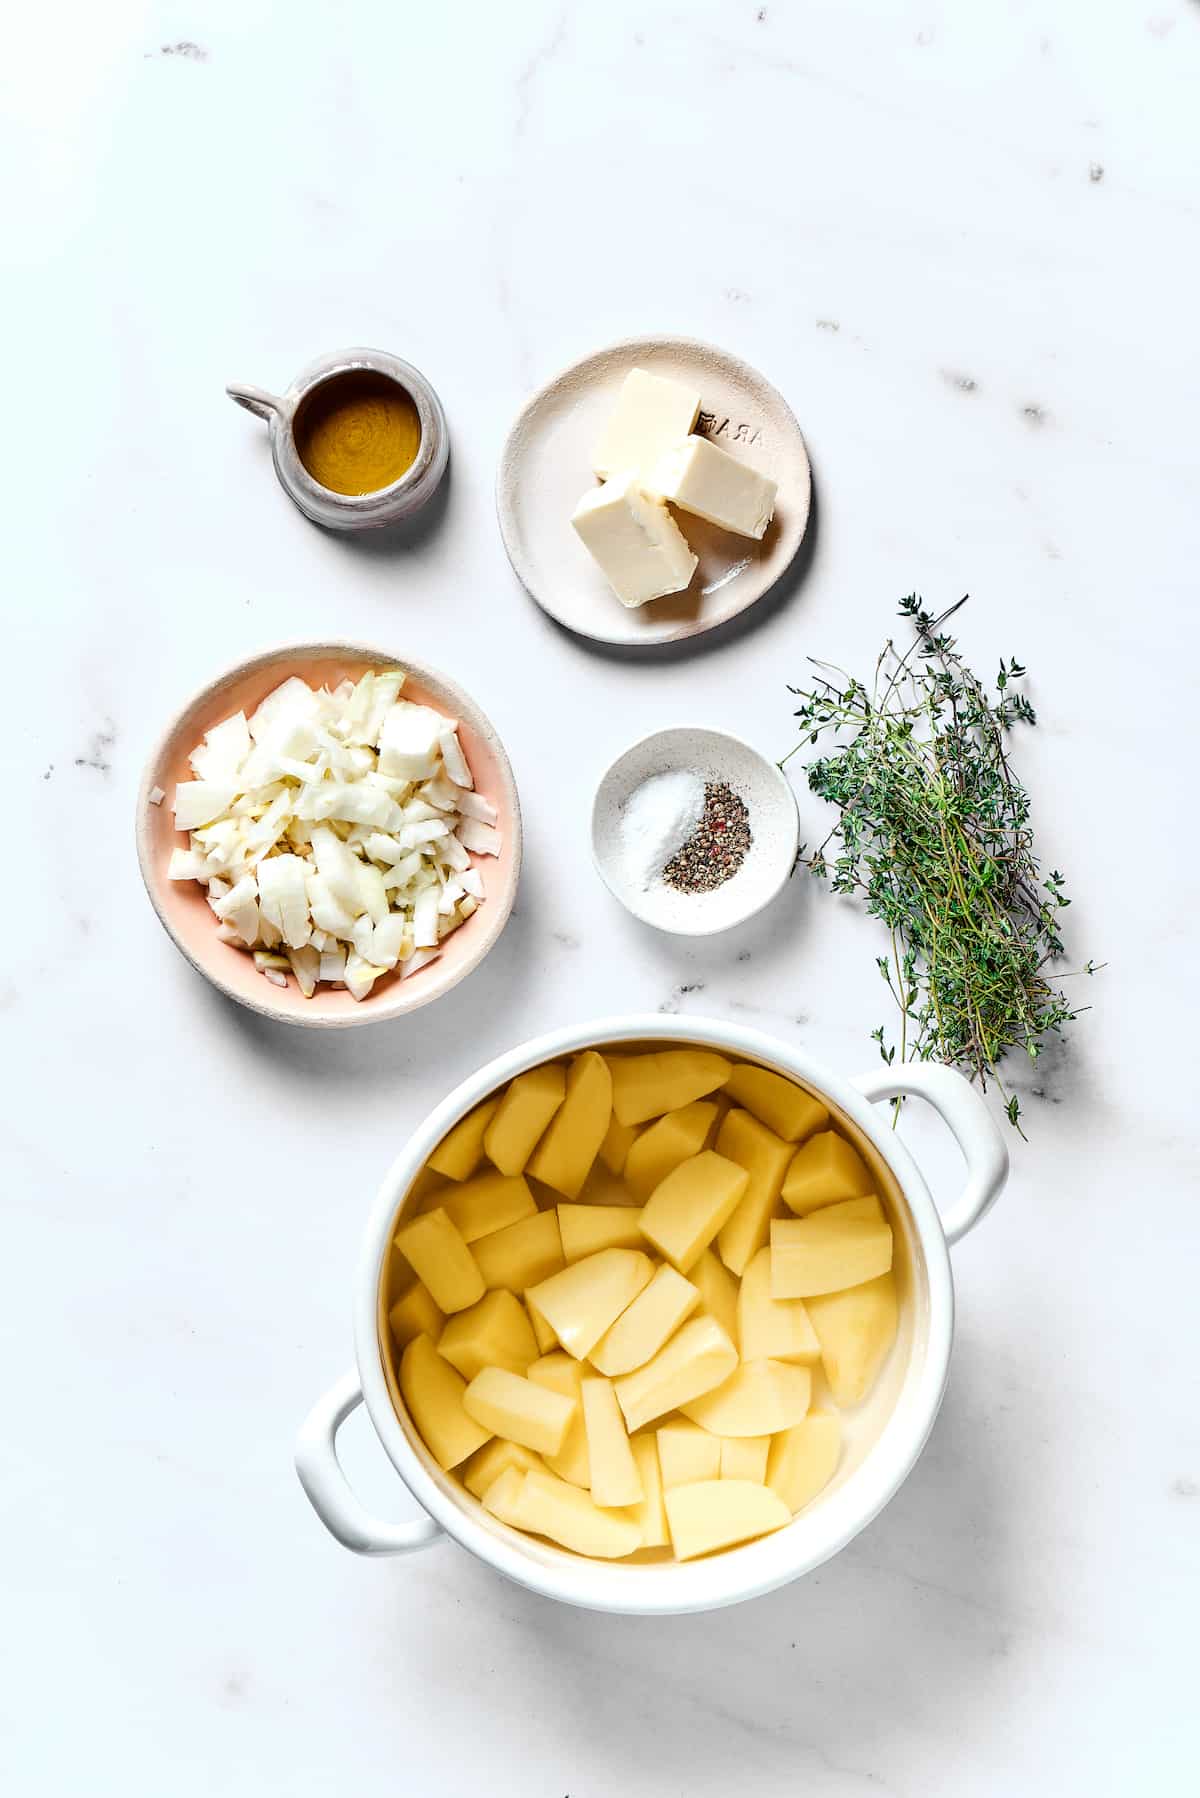 Overhead view of the filling ingredients for potato knishes